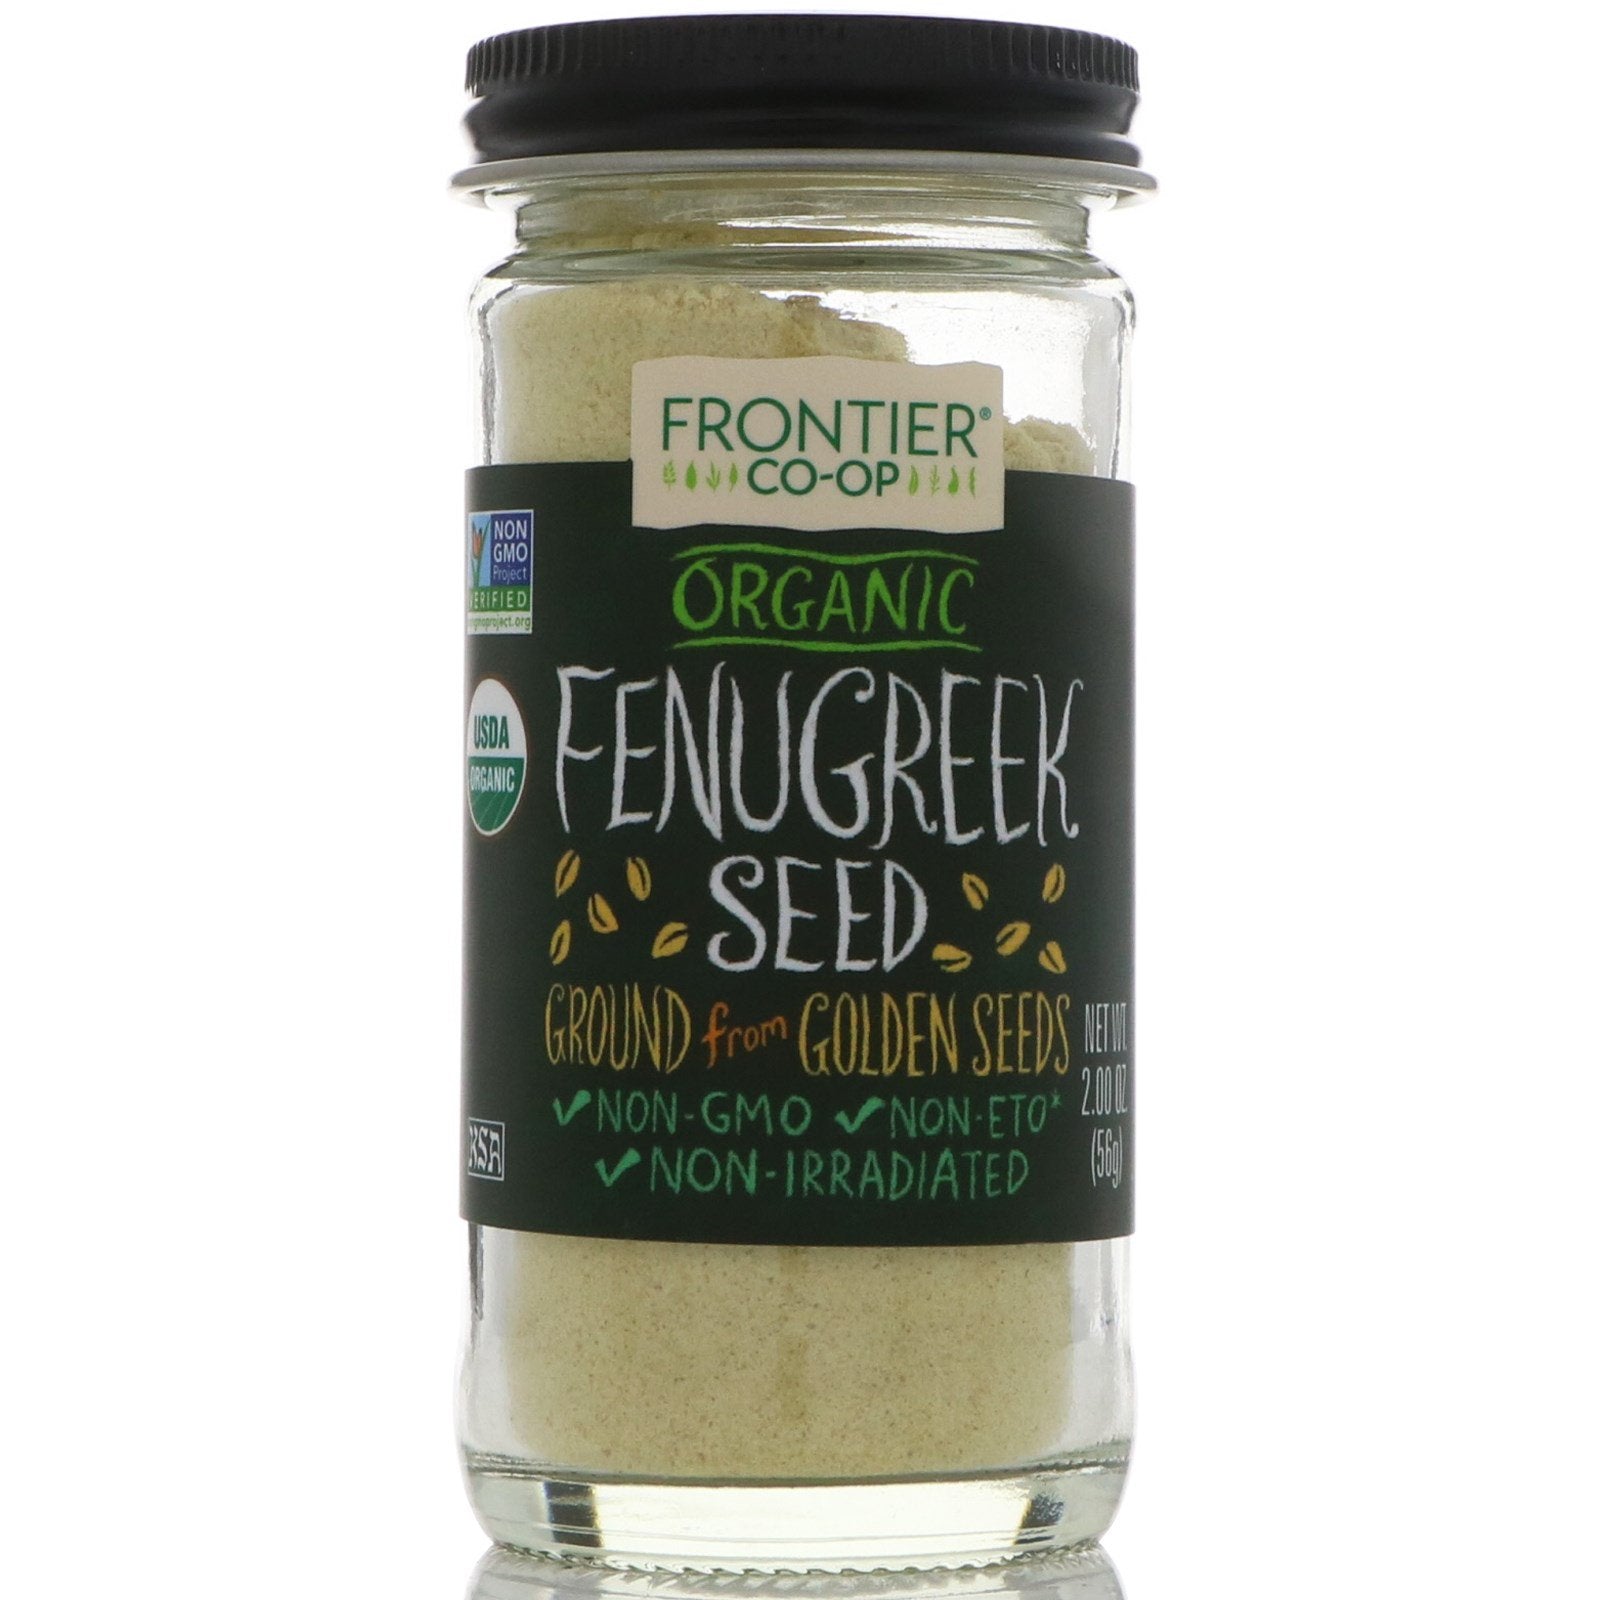 Frontier Natural Products, Organic Fenugreek Seed, Ground, 2.00 oz (56 g)